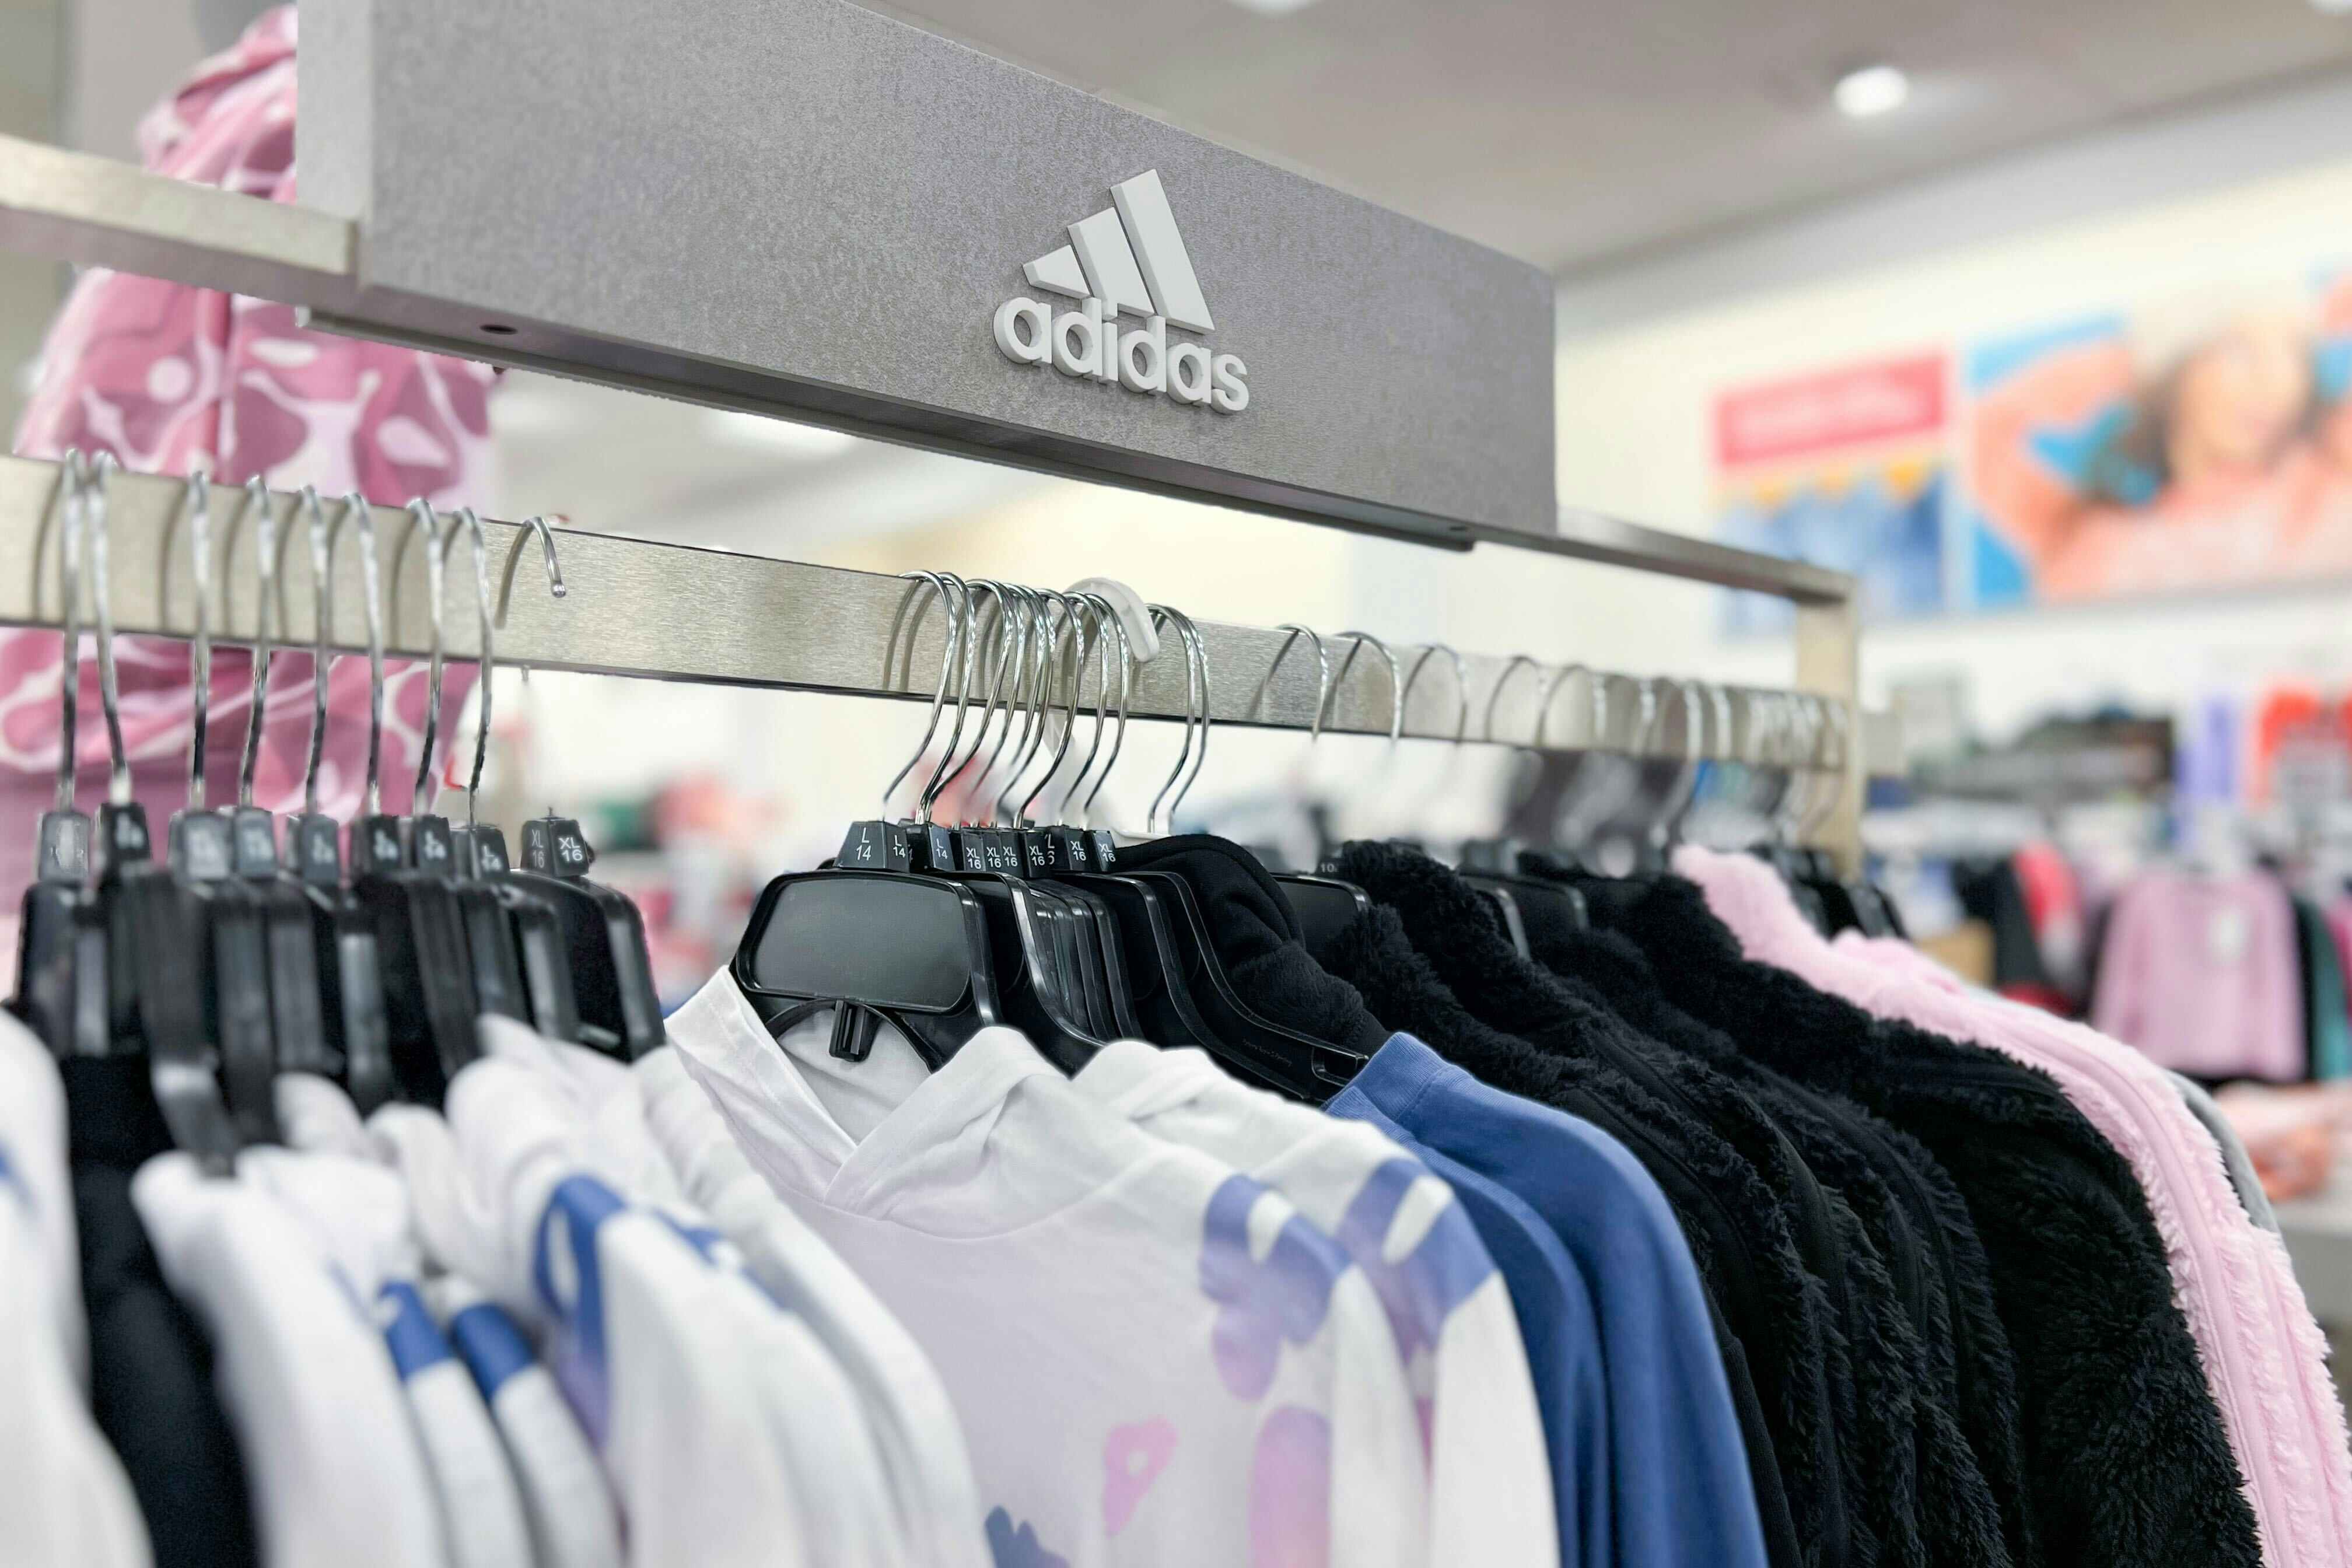 Adidas Apparel Sale at Shop Premium Outlets — Prices Start at $7.80